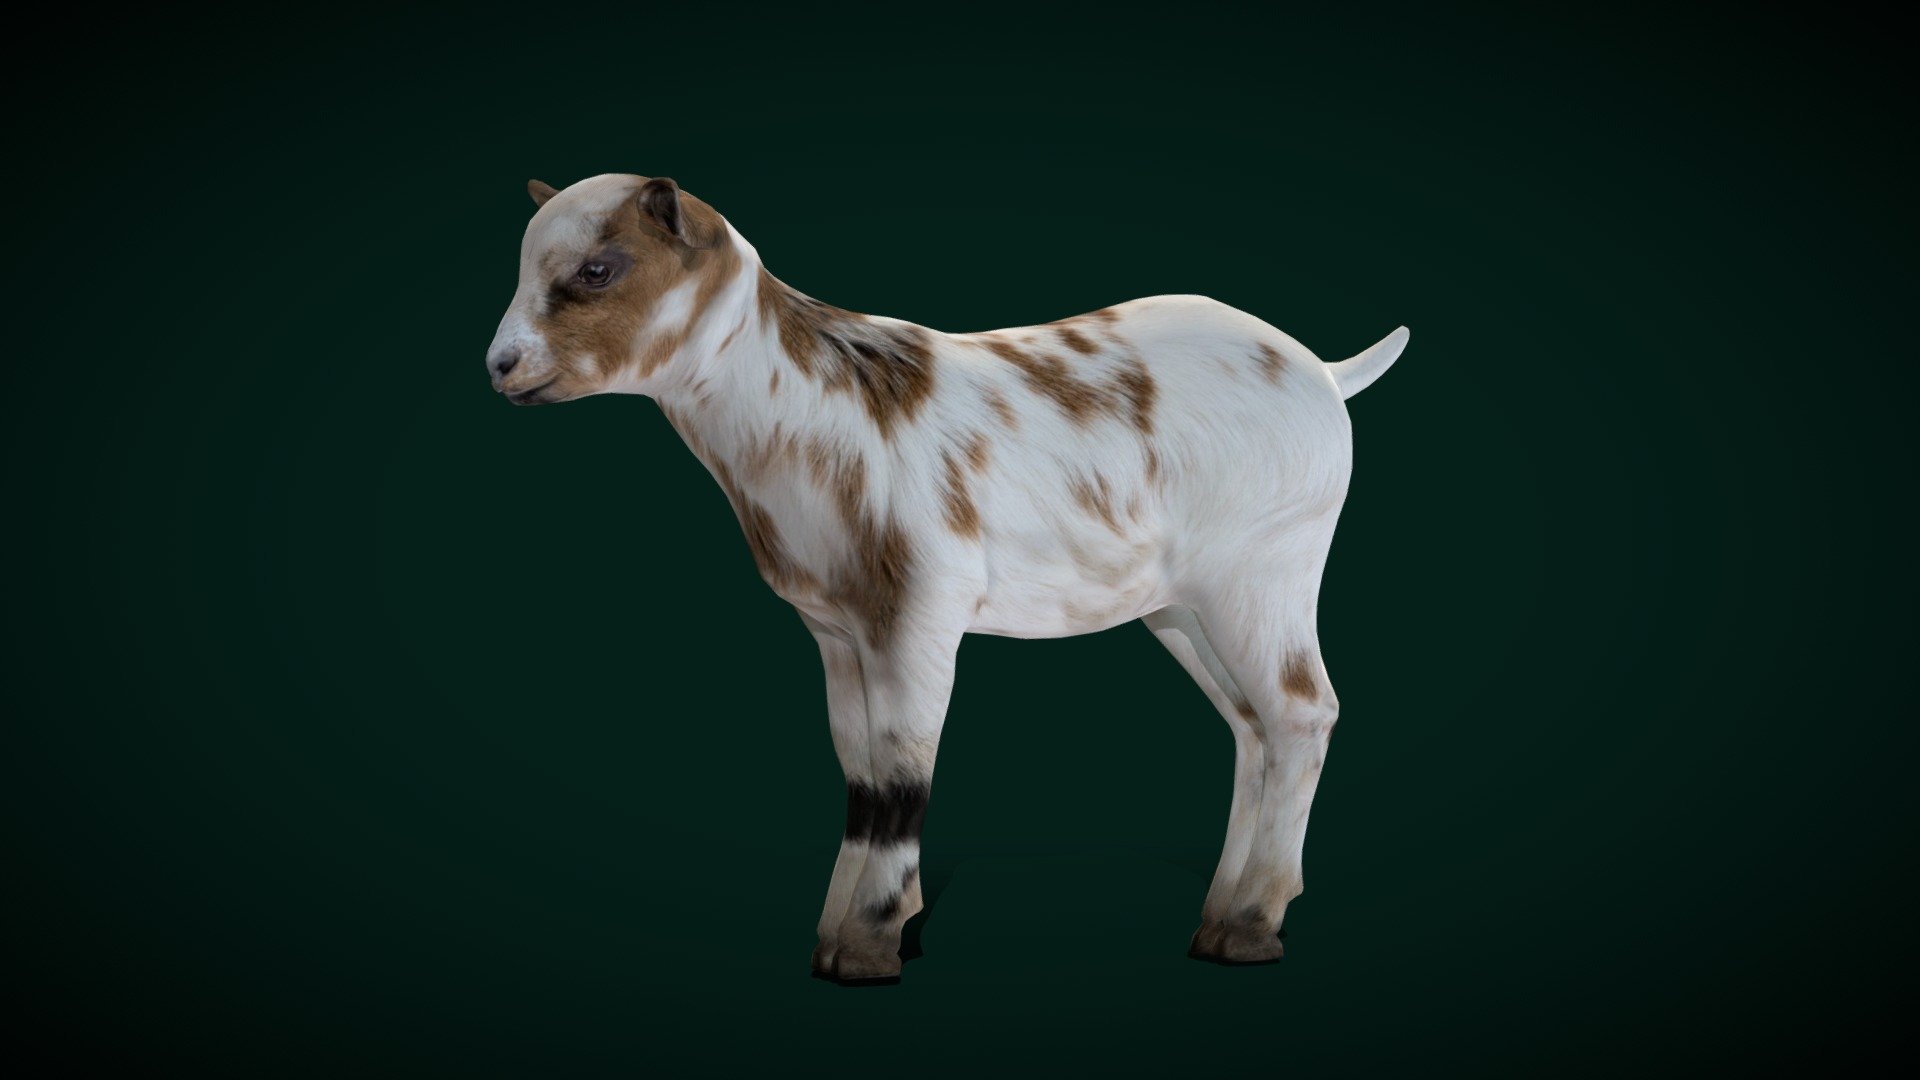 A Kid (Doeling)Domestic Baby Goat,livestock

Capra aegagrus hircus Animal Mammal(goat-antelope)Pet,Cute,Domestic Farm Animal

1 Draw Calls

LowPoly 

Game Ready (Asset)

Subdivision Surface Ready

10- Animations     (Attack,Die,Eat,Idle,Reborn,Run_F/B,Walk_B/F)

4K PBR Textures Material

Unreal FBX (Unreal 4,5 Plus)

Unity FBX

Blend File 3.6.5 LTS

USDZ File (AR Ready). Real Scale Dimension (Xcode ,Reality Composer, Keynote Ready)

Textures Files

GLB File (Unreal 5.1 Plus Native Support)


Gltf File ( Spark AR, Lens Studio(SnapChat) , Effector(Tiktok) , Spline, Play Canvas,Omiverse ) Compatible




Triangles -9449



Faces -5185

Edges -9965

Vertices -4779

Diffuse, Metallic, Roughness , Normal Map ,Specular Map,AO

A baby goat is called a kid. baby female goat is called a doeling, and baby male goat is called a buckling. domestic goat is a domesticated species of goat-antelope typically kept as livestock. It was domesticated from the wild goat of Southwest Asia and Eastern Europe 3d model